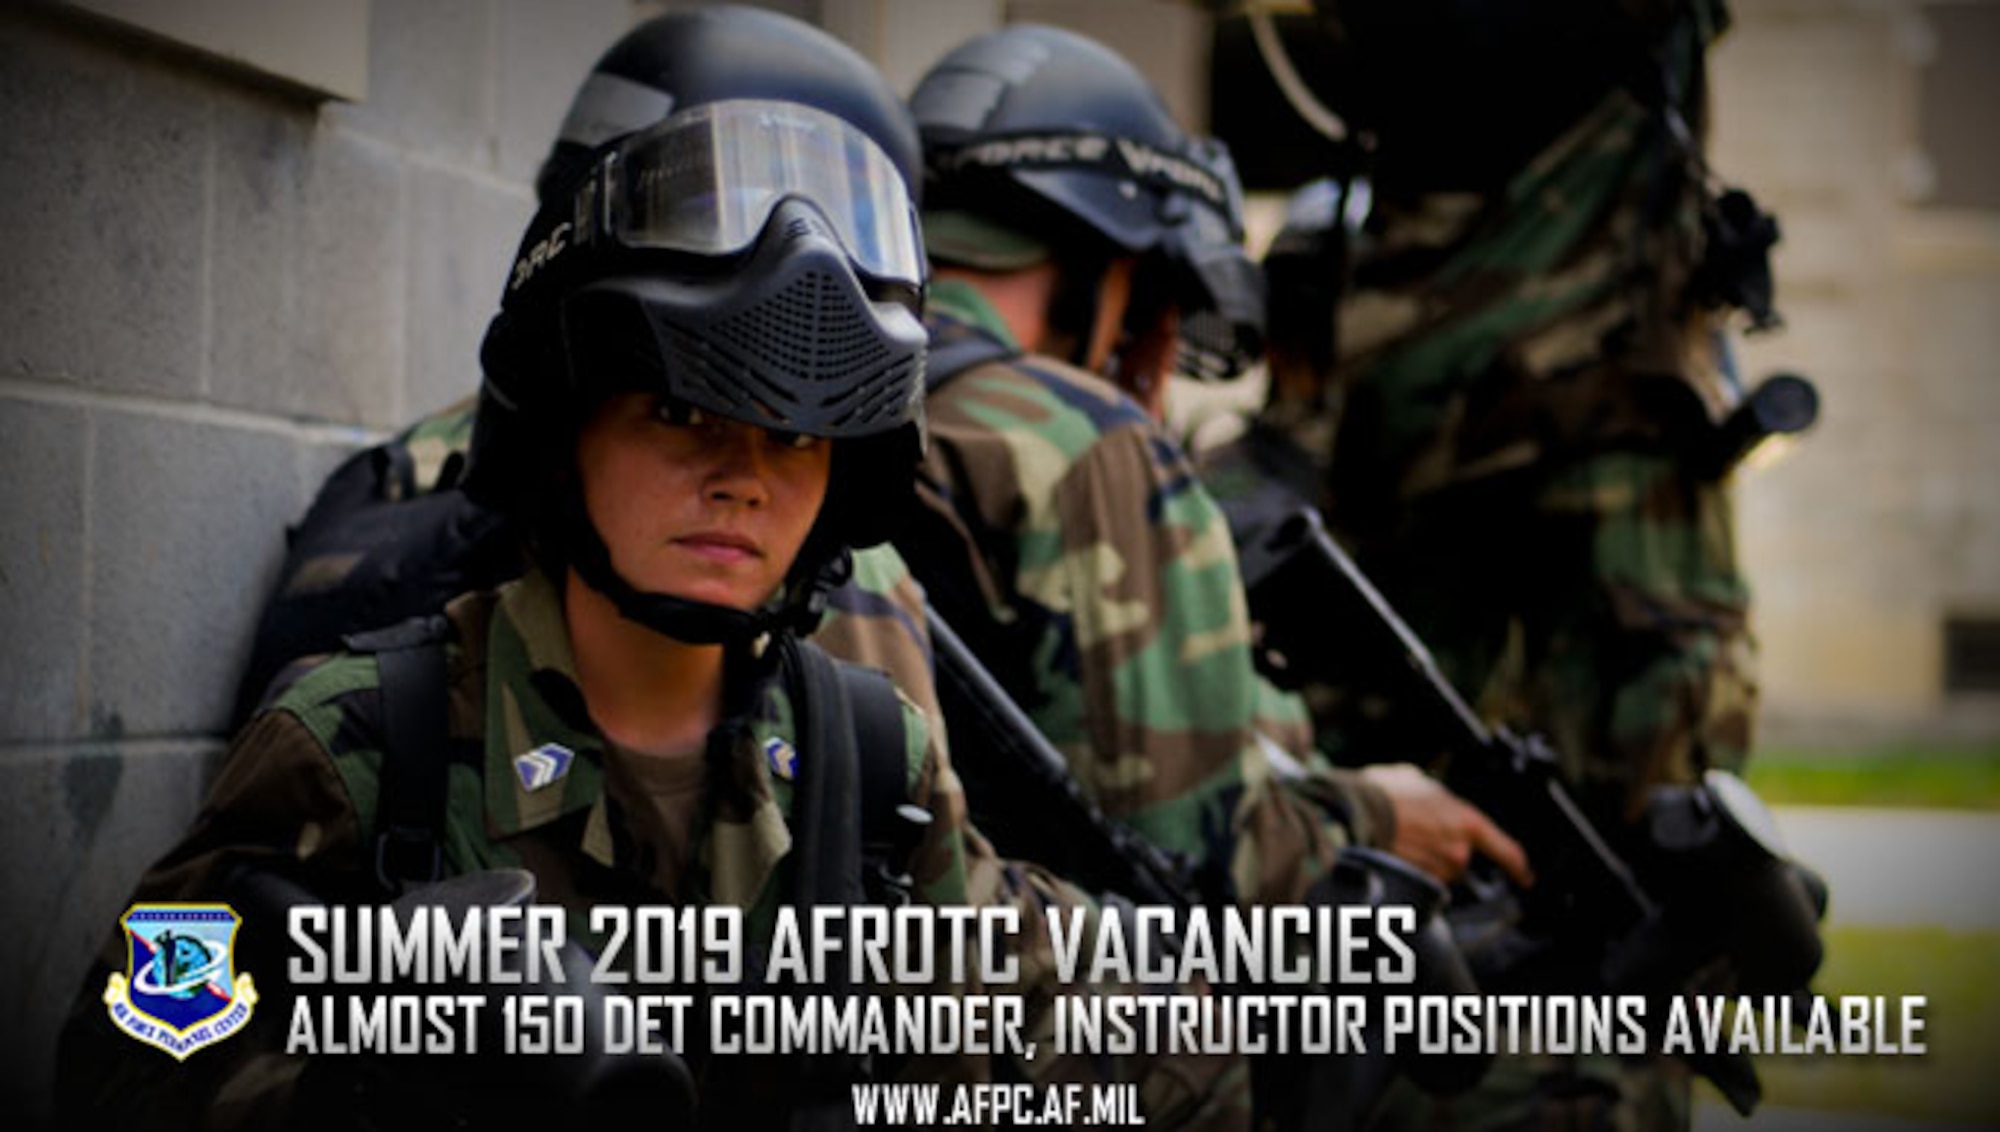 Summer 2019 AFROTC vacancies; almost 150 det commander, instructor positions available